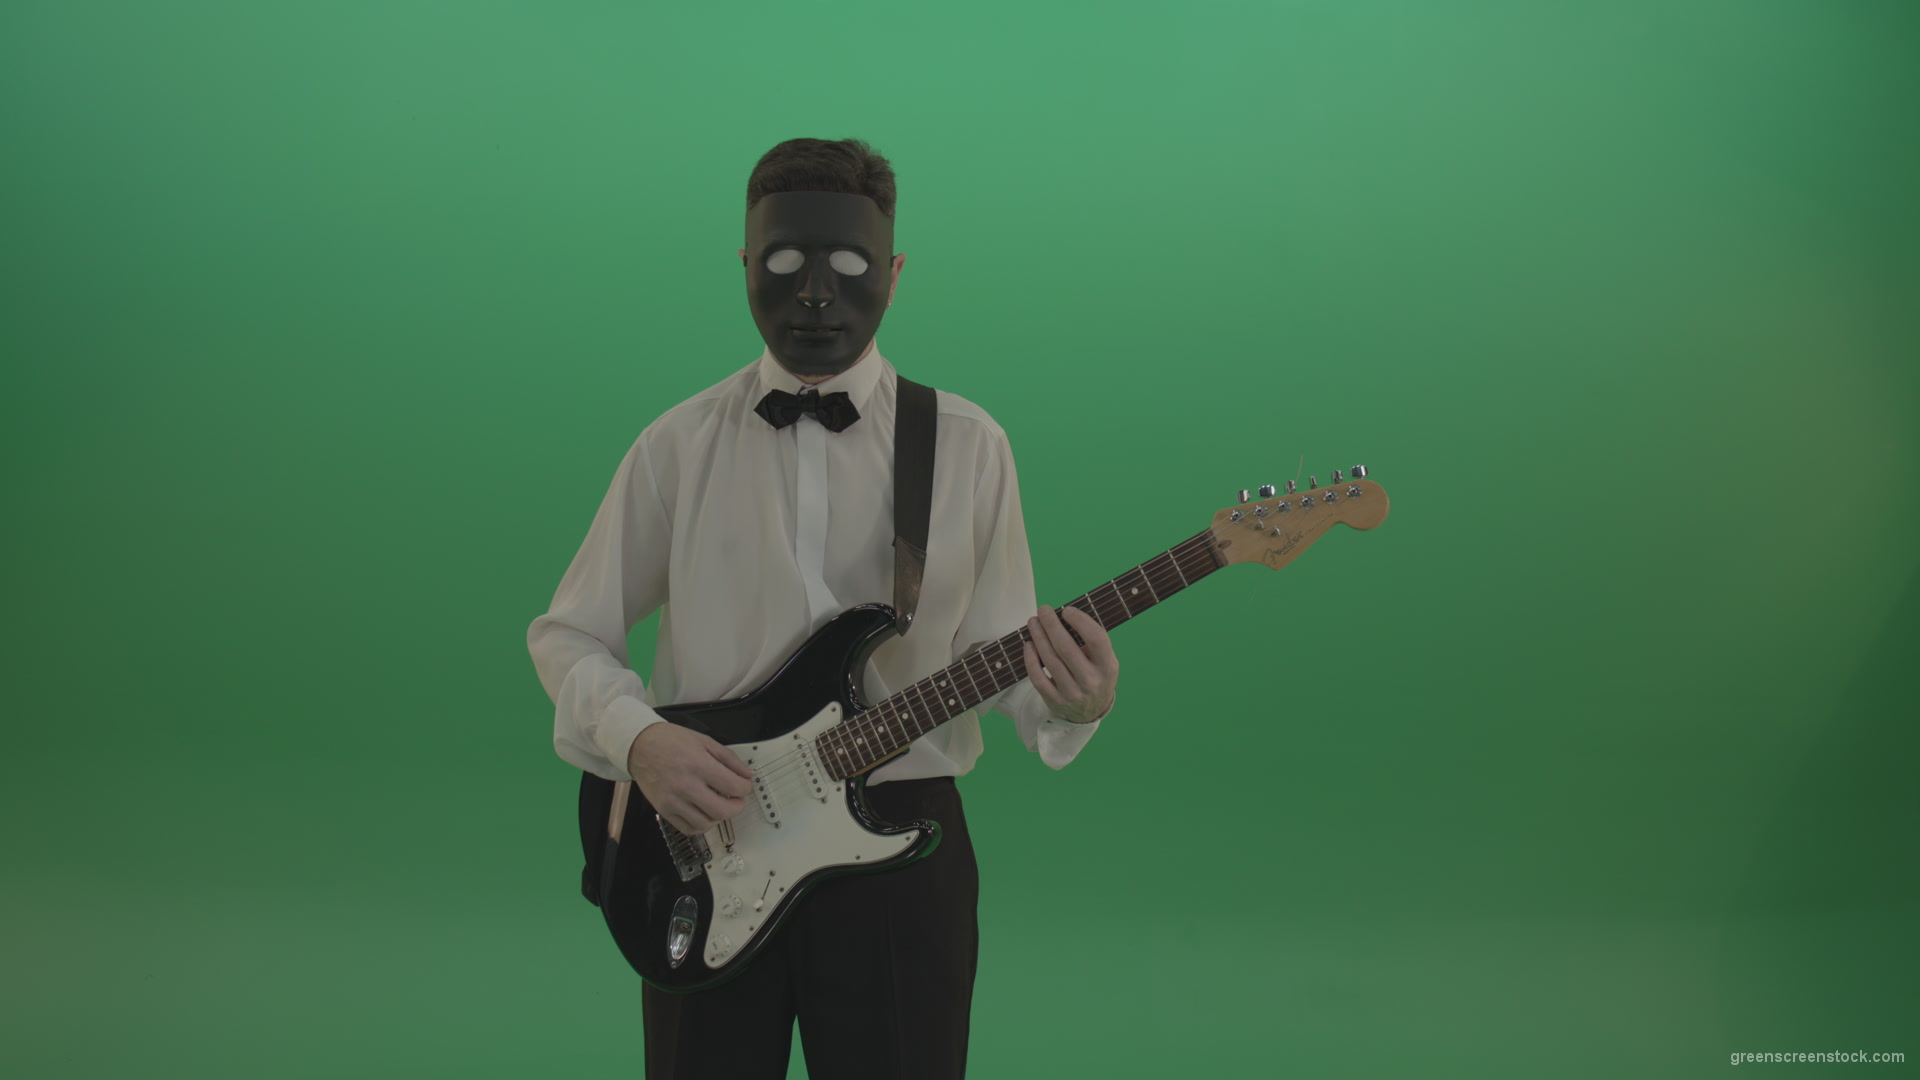 Horror-classic-guitarist-man-in-black-mask-and-white-shirt-play-guitar-on-green-screen_001 Green Screen Stock